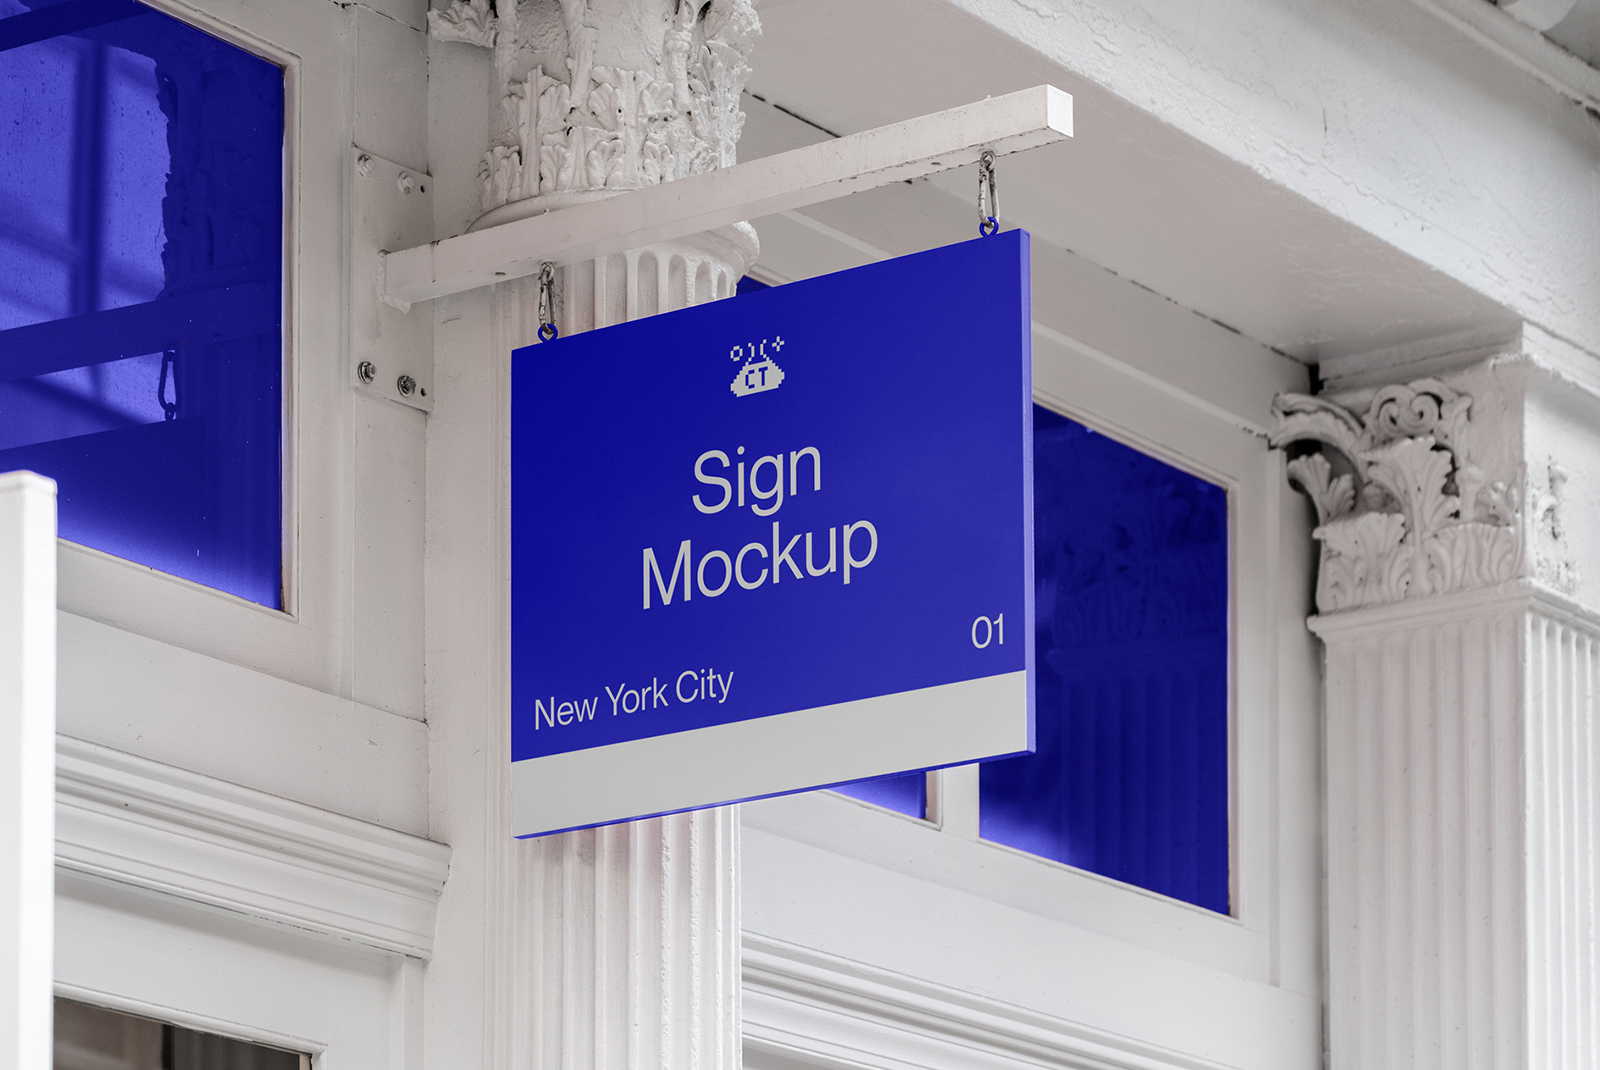 Blue hanging sign mockup on a classic white building facade for designers to showcase branding, located in an urban setting.